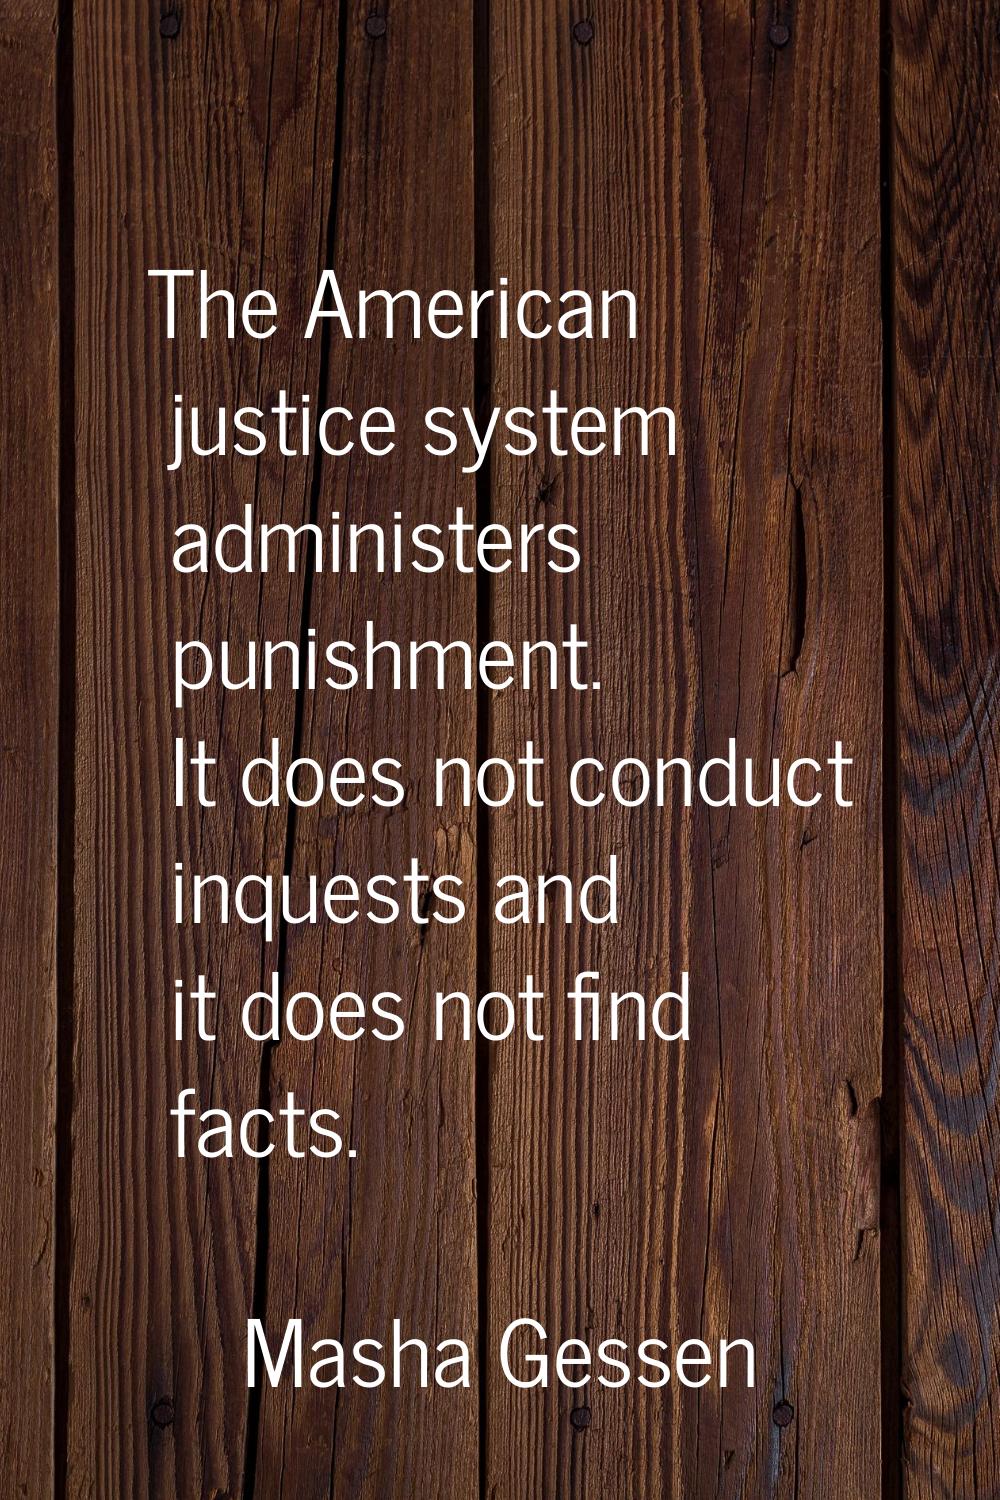 The American justice system administers punishment. It does not conduct inquests and it does not fi